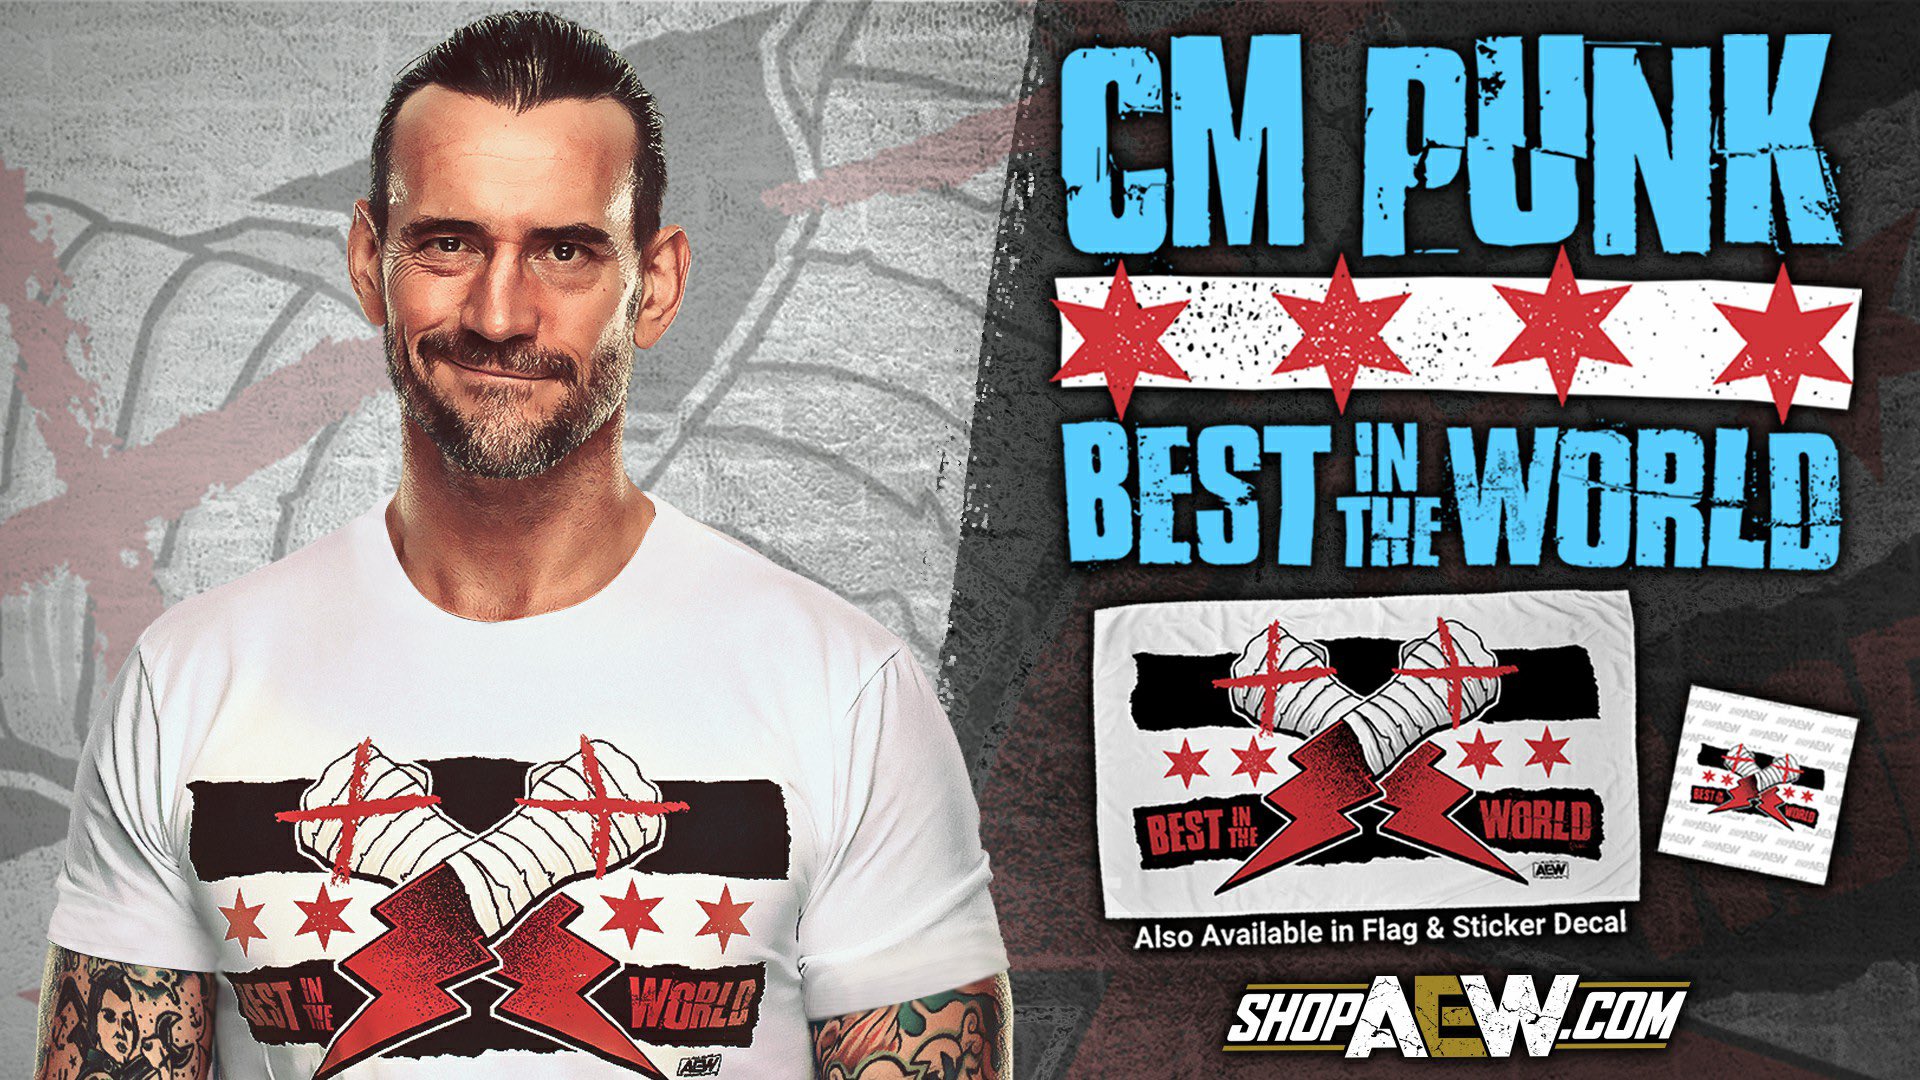 Shopaew Com This Cmpunk Shirt Is The Best In The World Get It Today At T Co 9hhlxpcsbp Shopaew Aew Aewrampage Cmpunk T Co H2yvs1yt5k Twitter